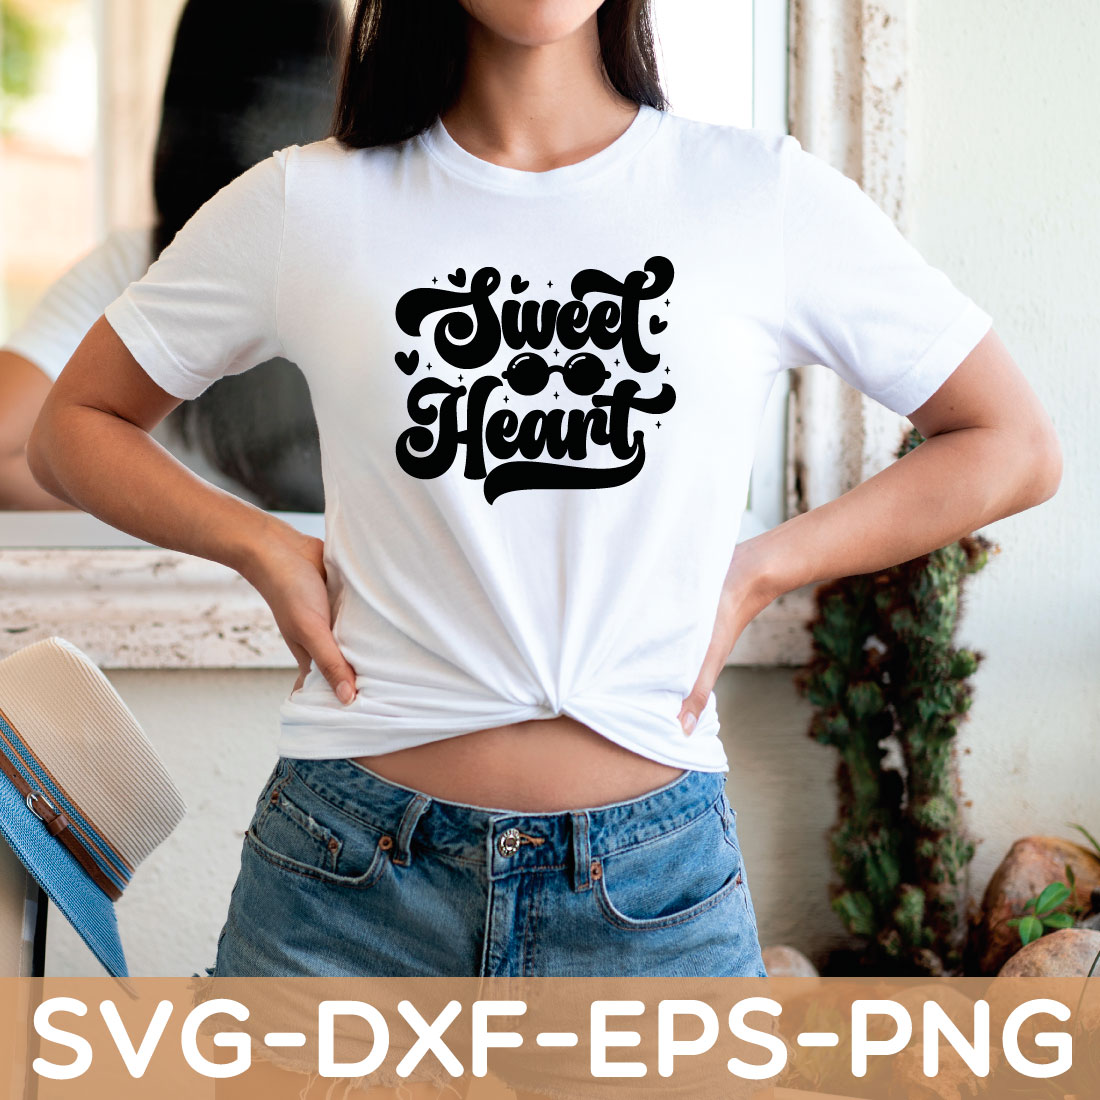 sweet heart shirt preview image.